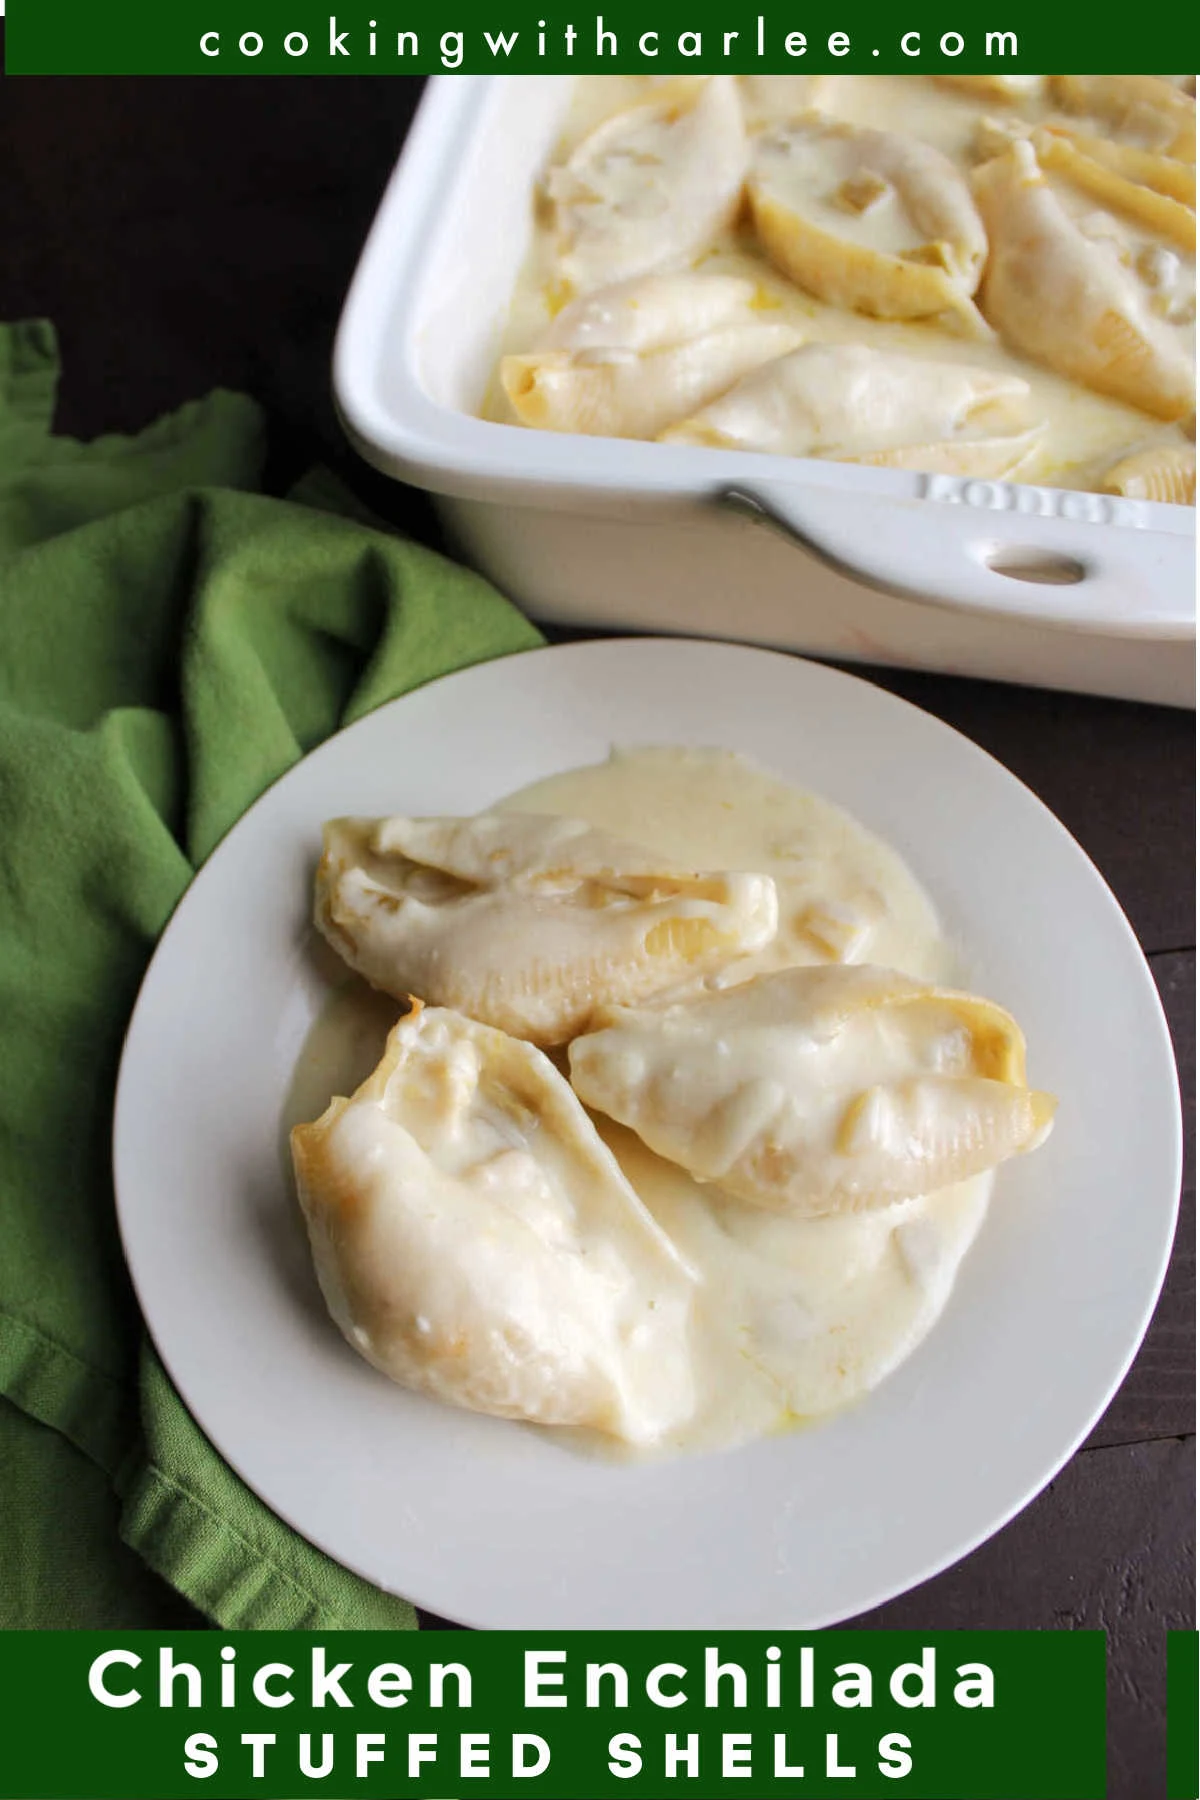 Cheesy chicken enchilada stuffed shells bathed in a white sour cream and cheese sauce are such a delicious and hearty meal. They are part Tex-Mex, part pasta and all amazing!